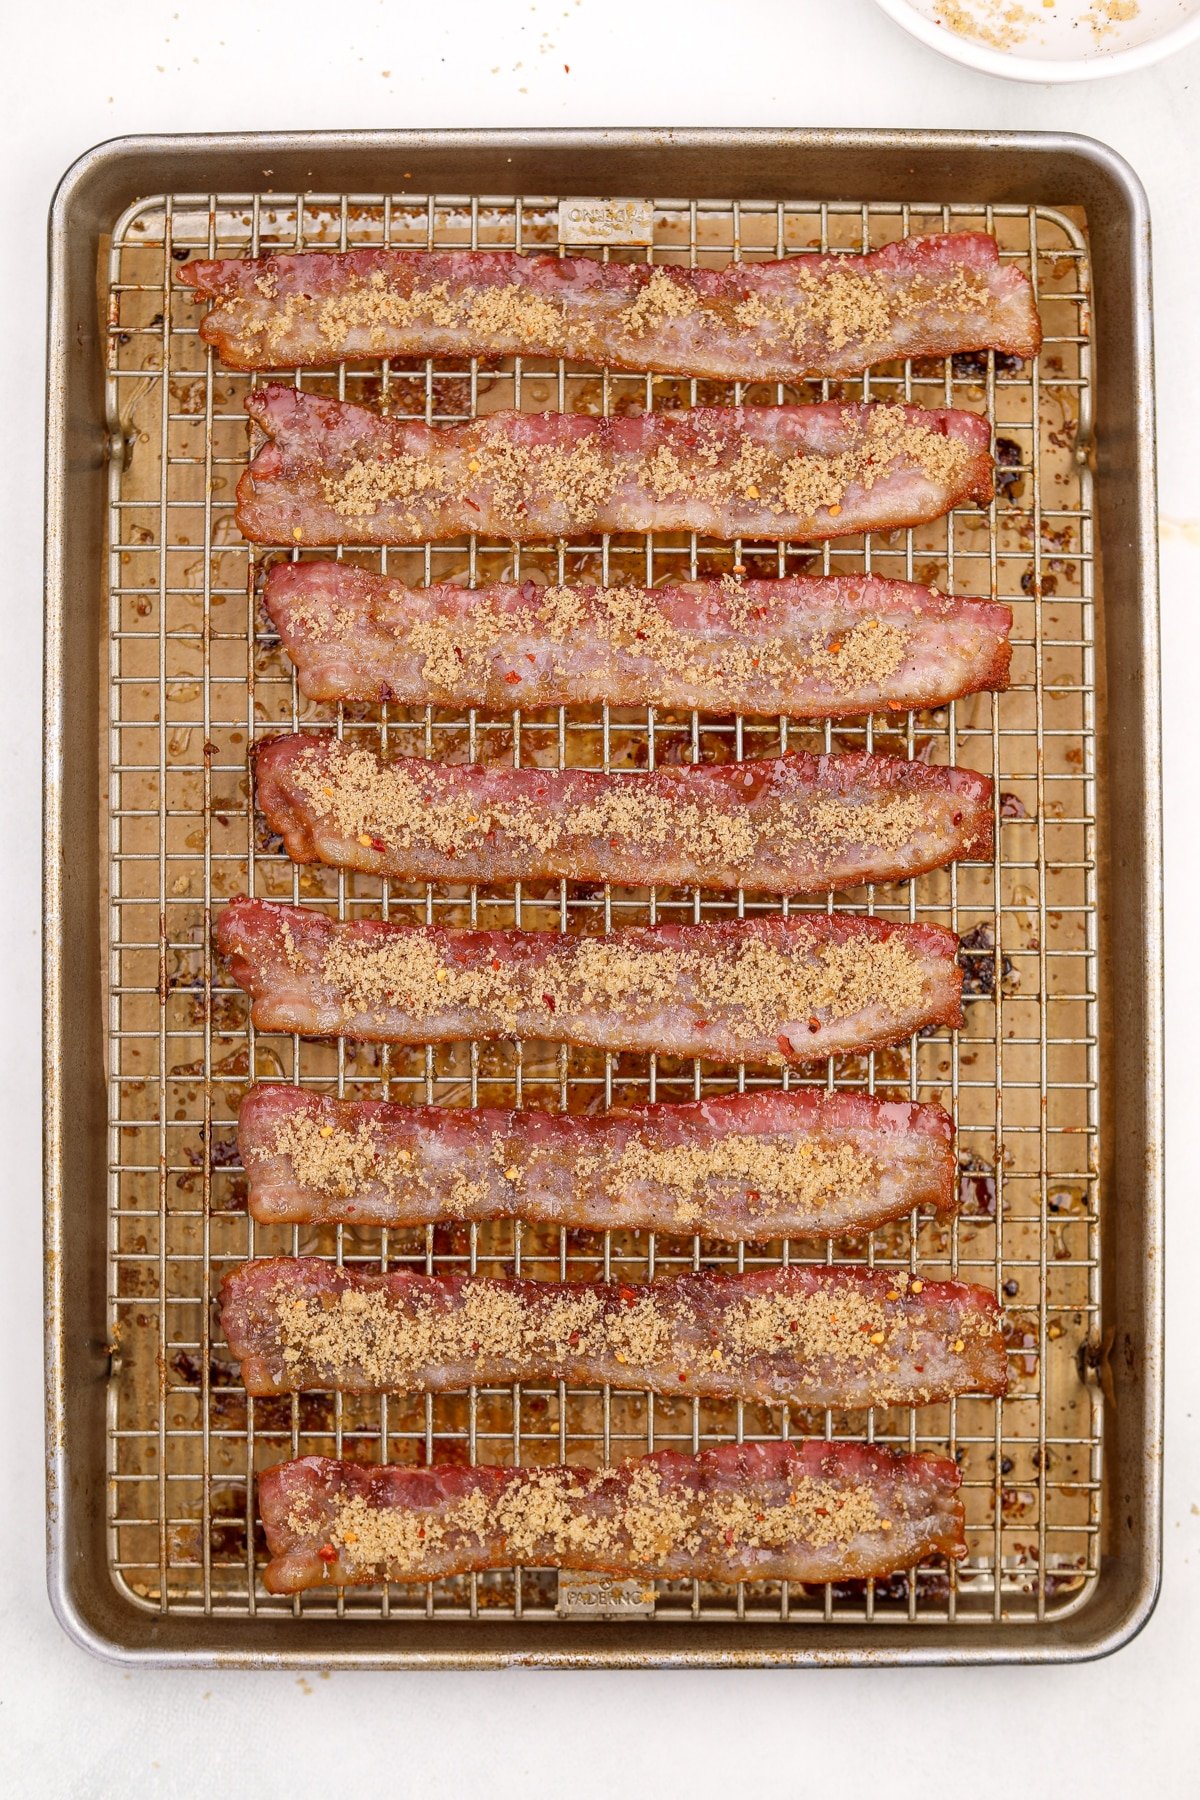 Bacon on a baking sheet topped with brown sugar.